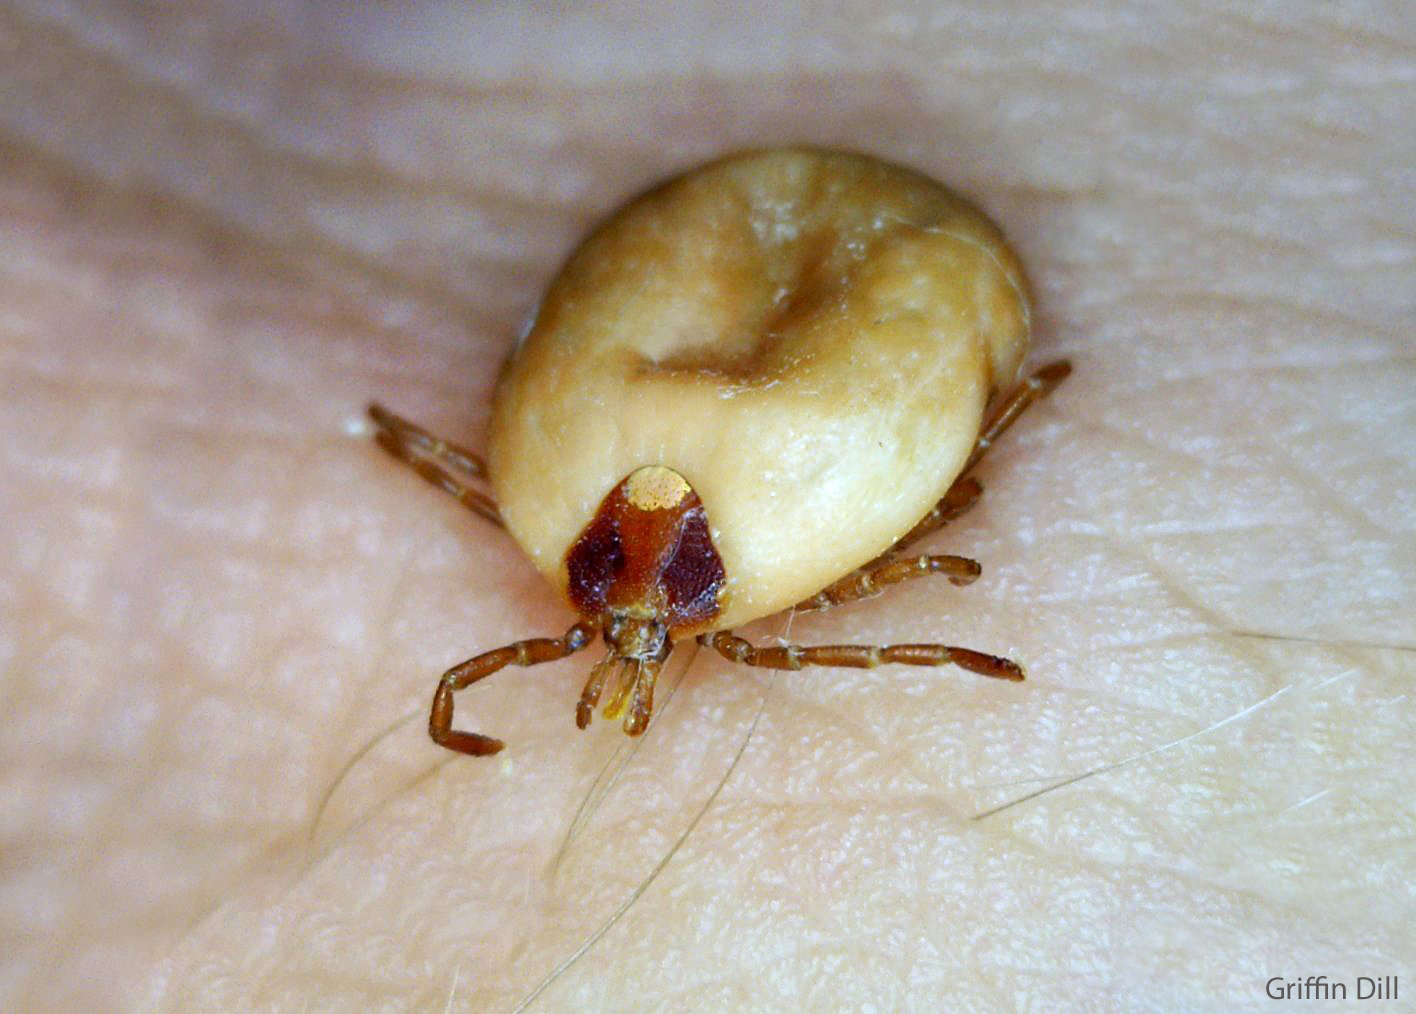 Lone Star Tick - Adult Female (Engorged)